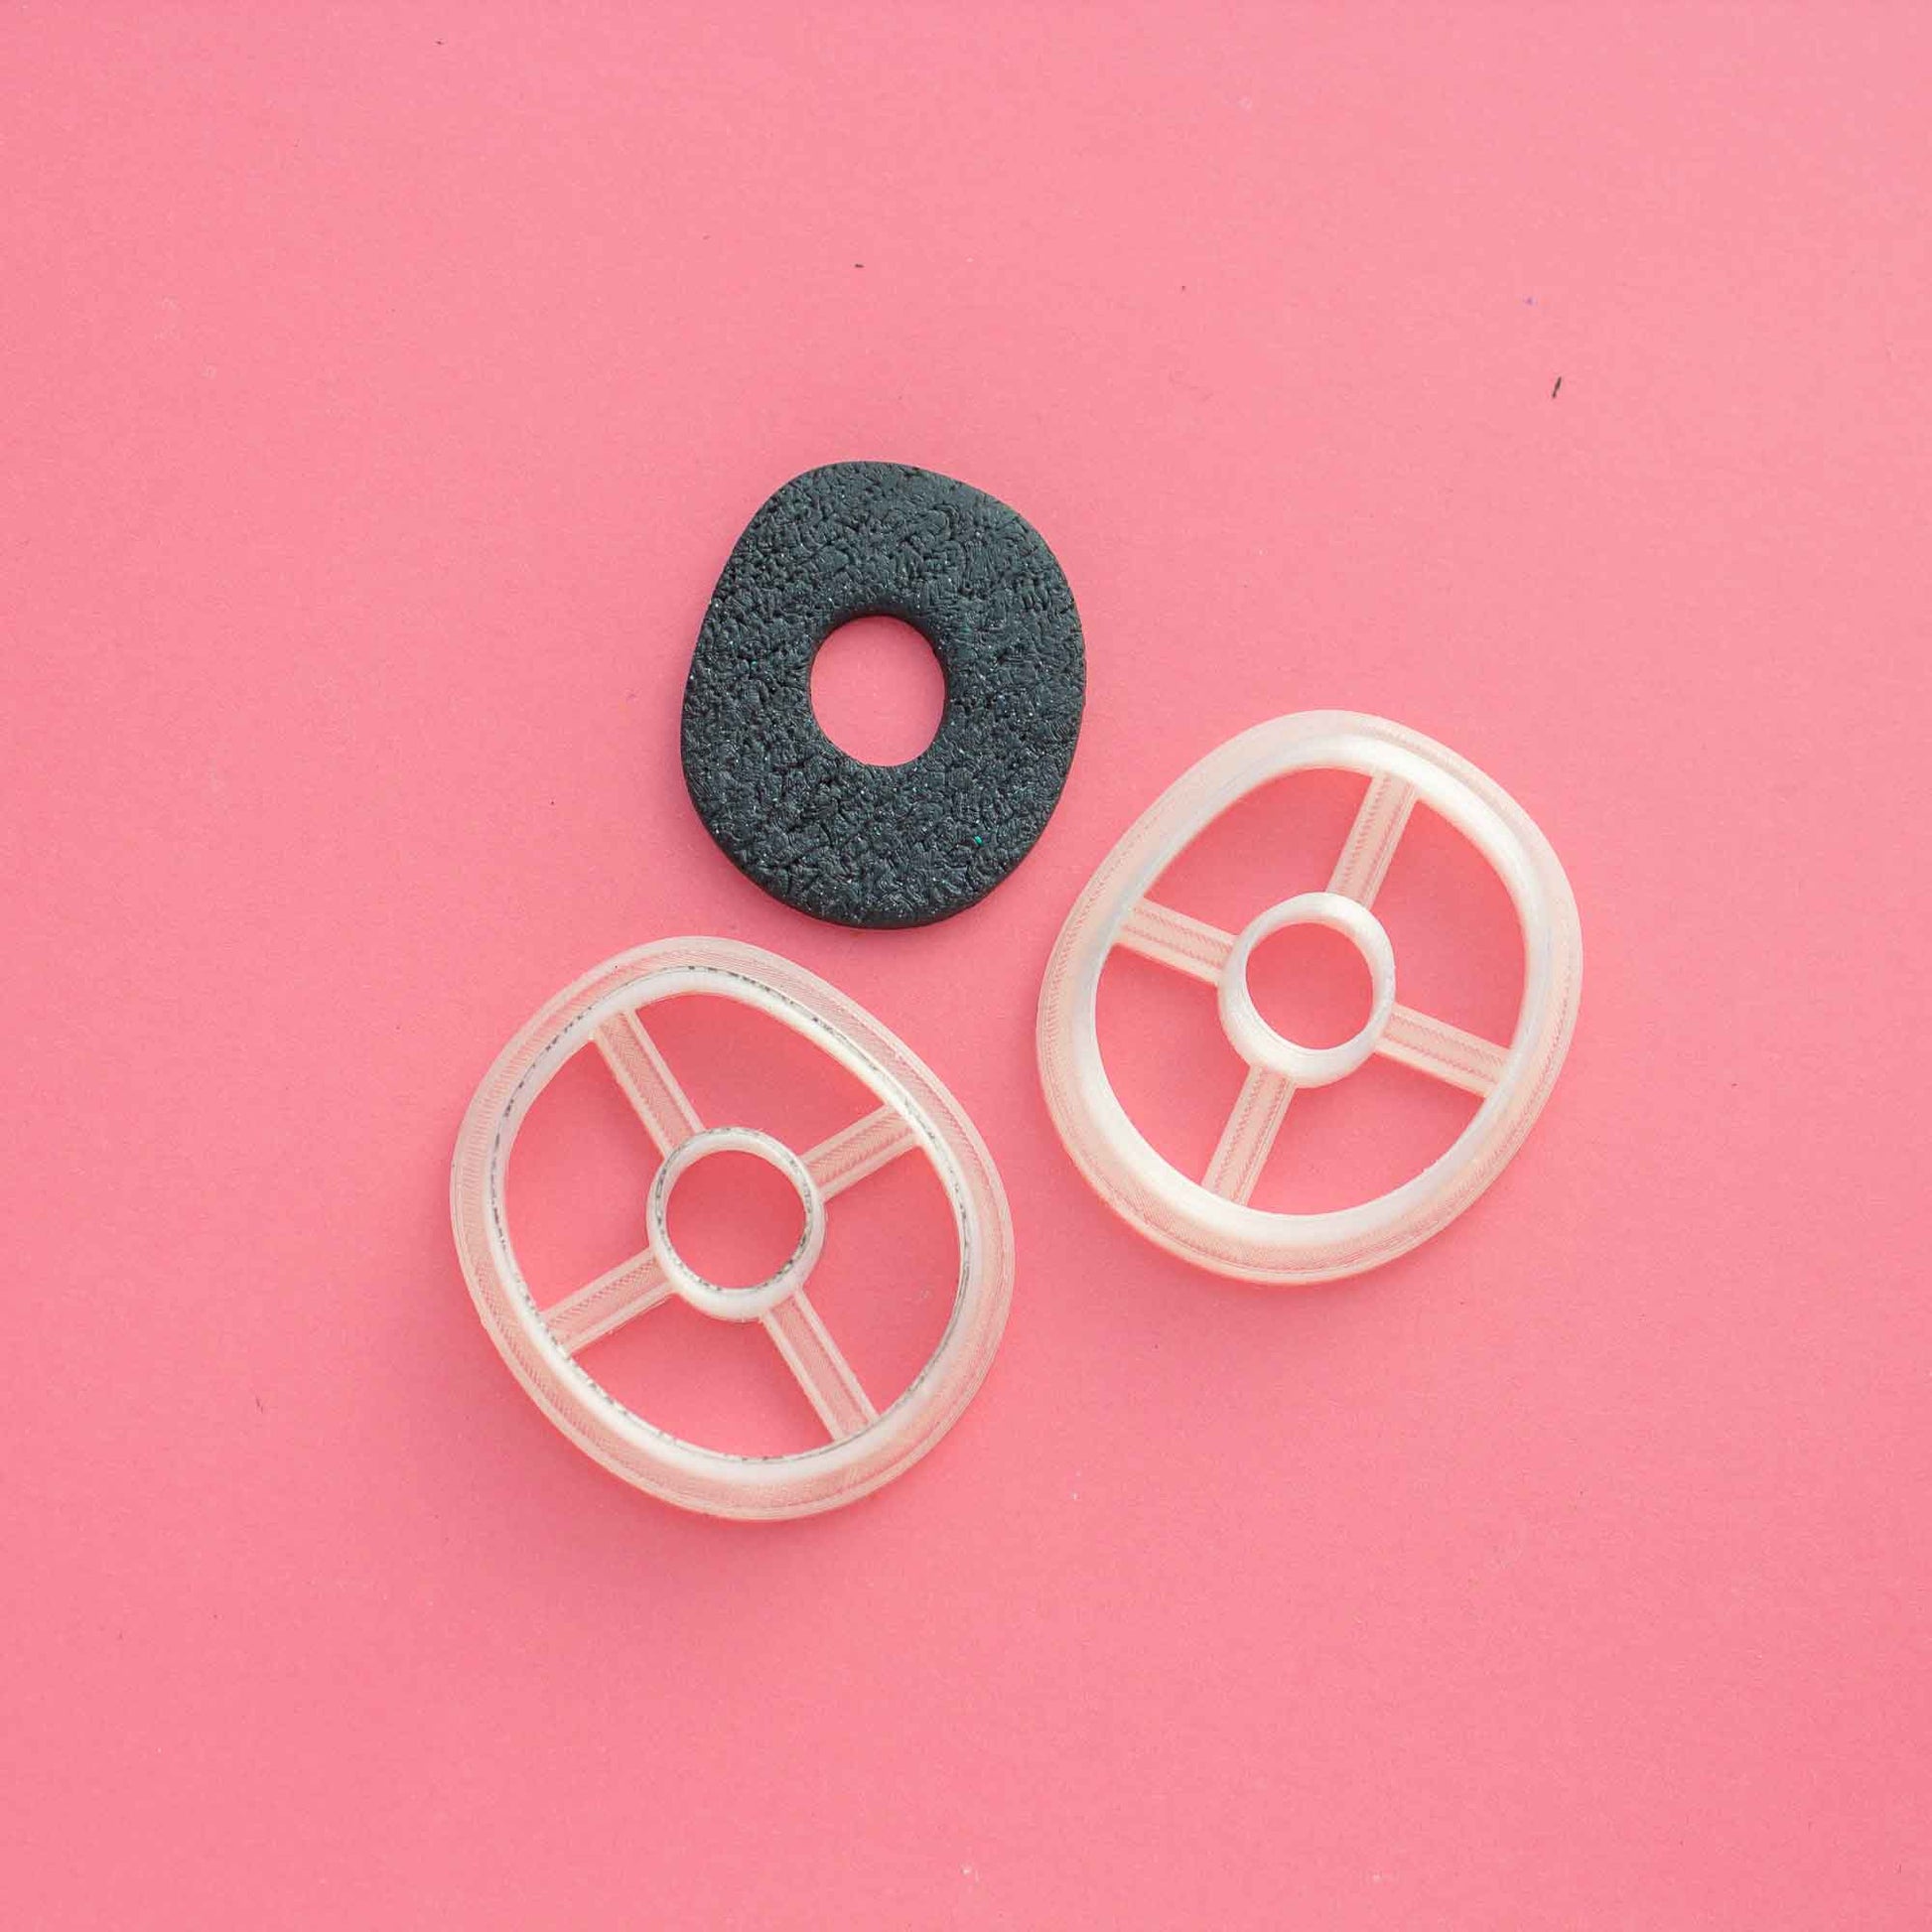 2 mirrored organic circle cutters for clay on a pink background next to a black same shape polymer clay piece